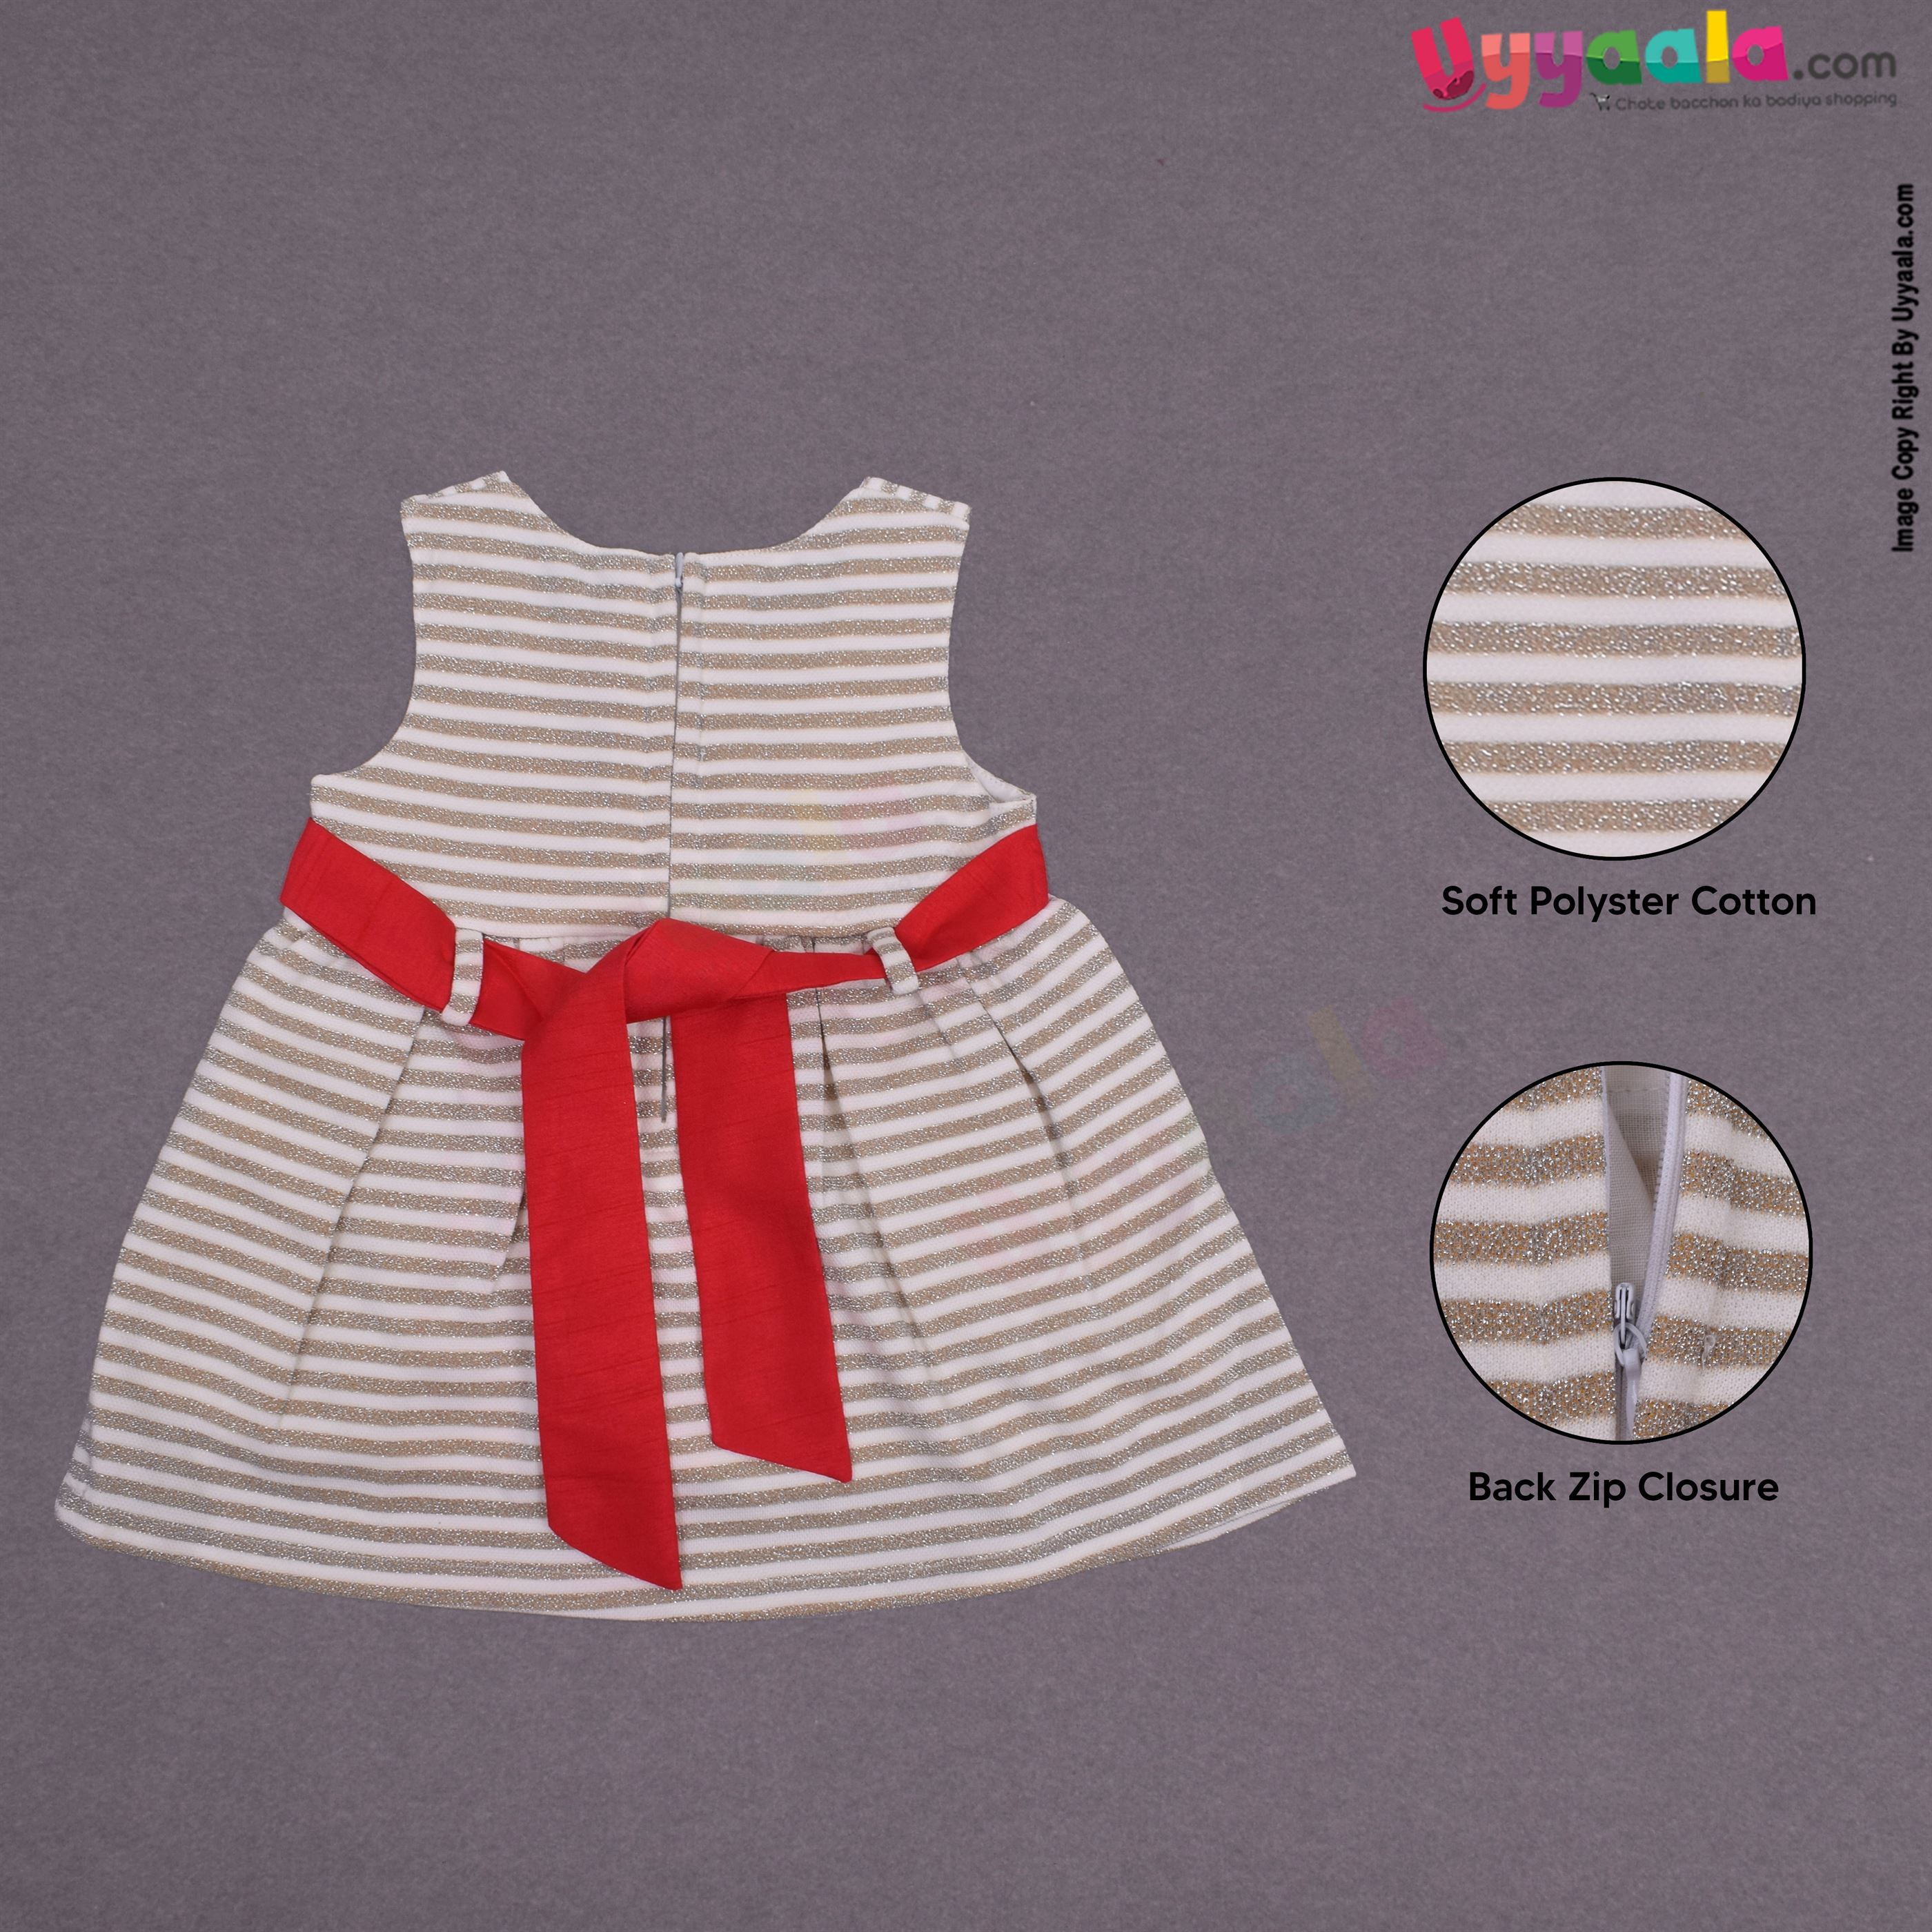 YELLOW DUCK Cotton sleeveless party wear frock for baby girl with bow applique- Cream with golden stripes